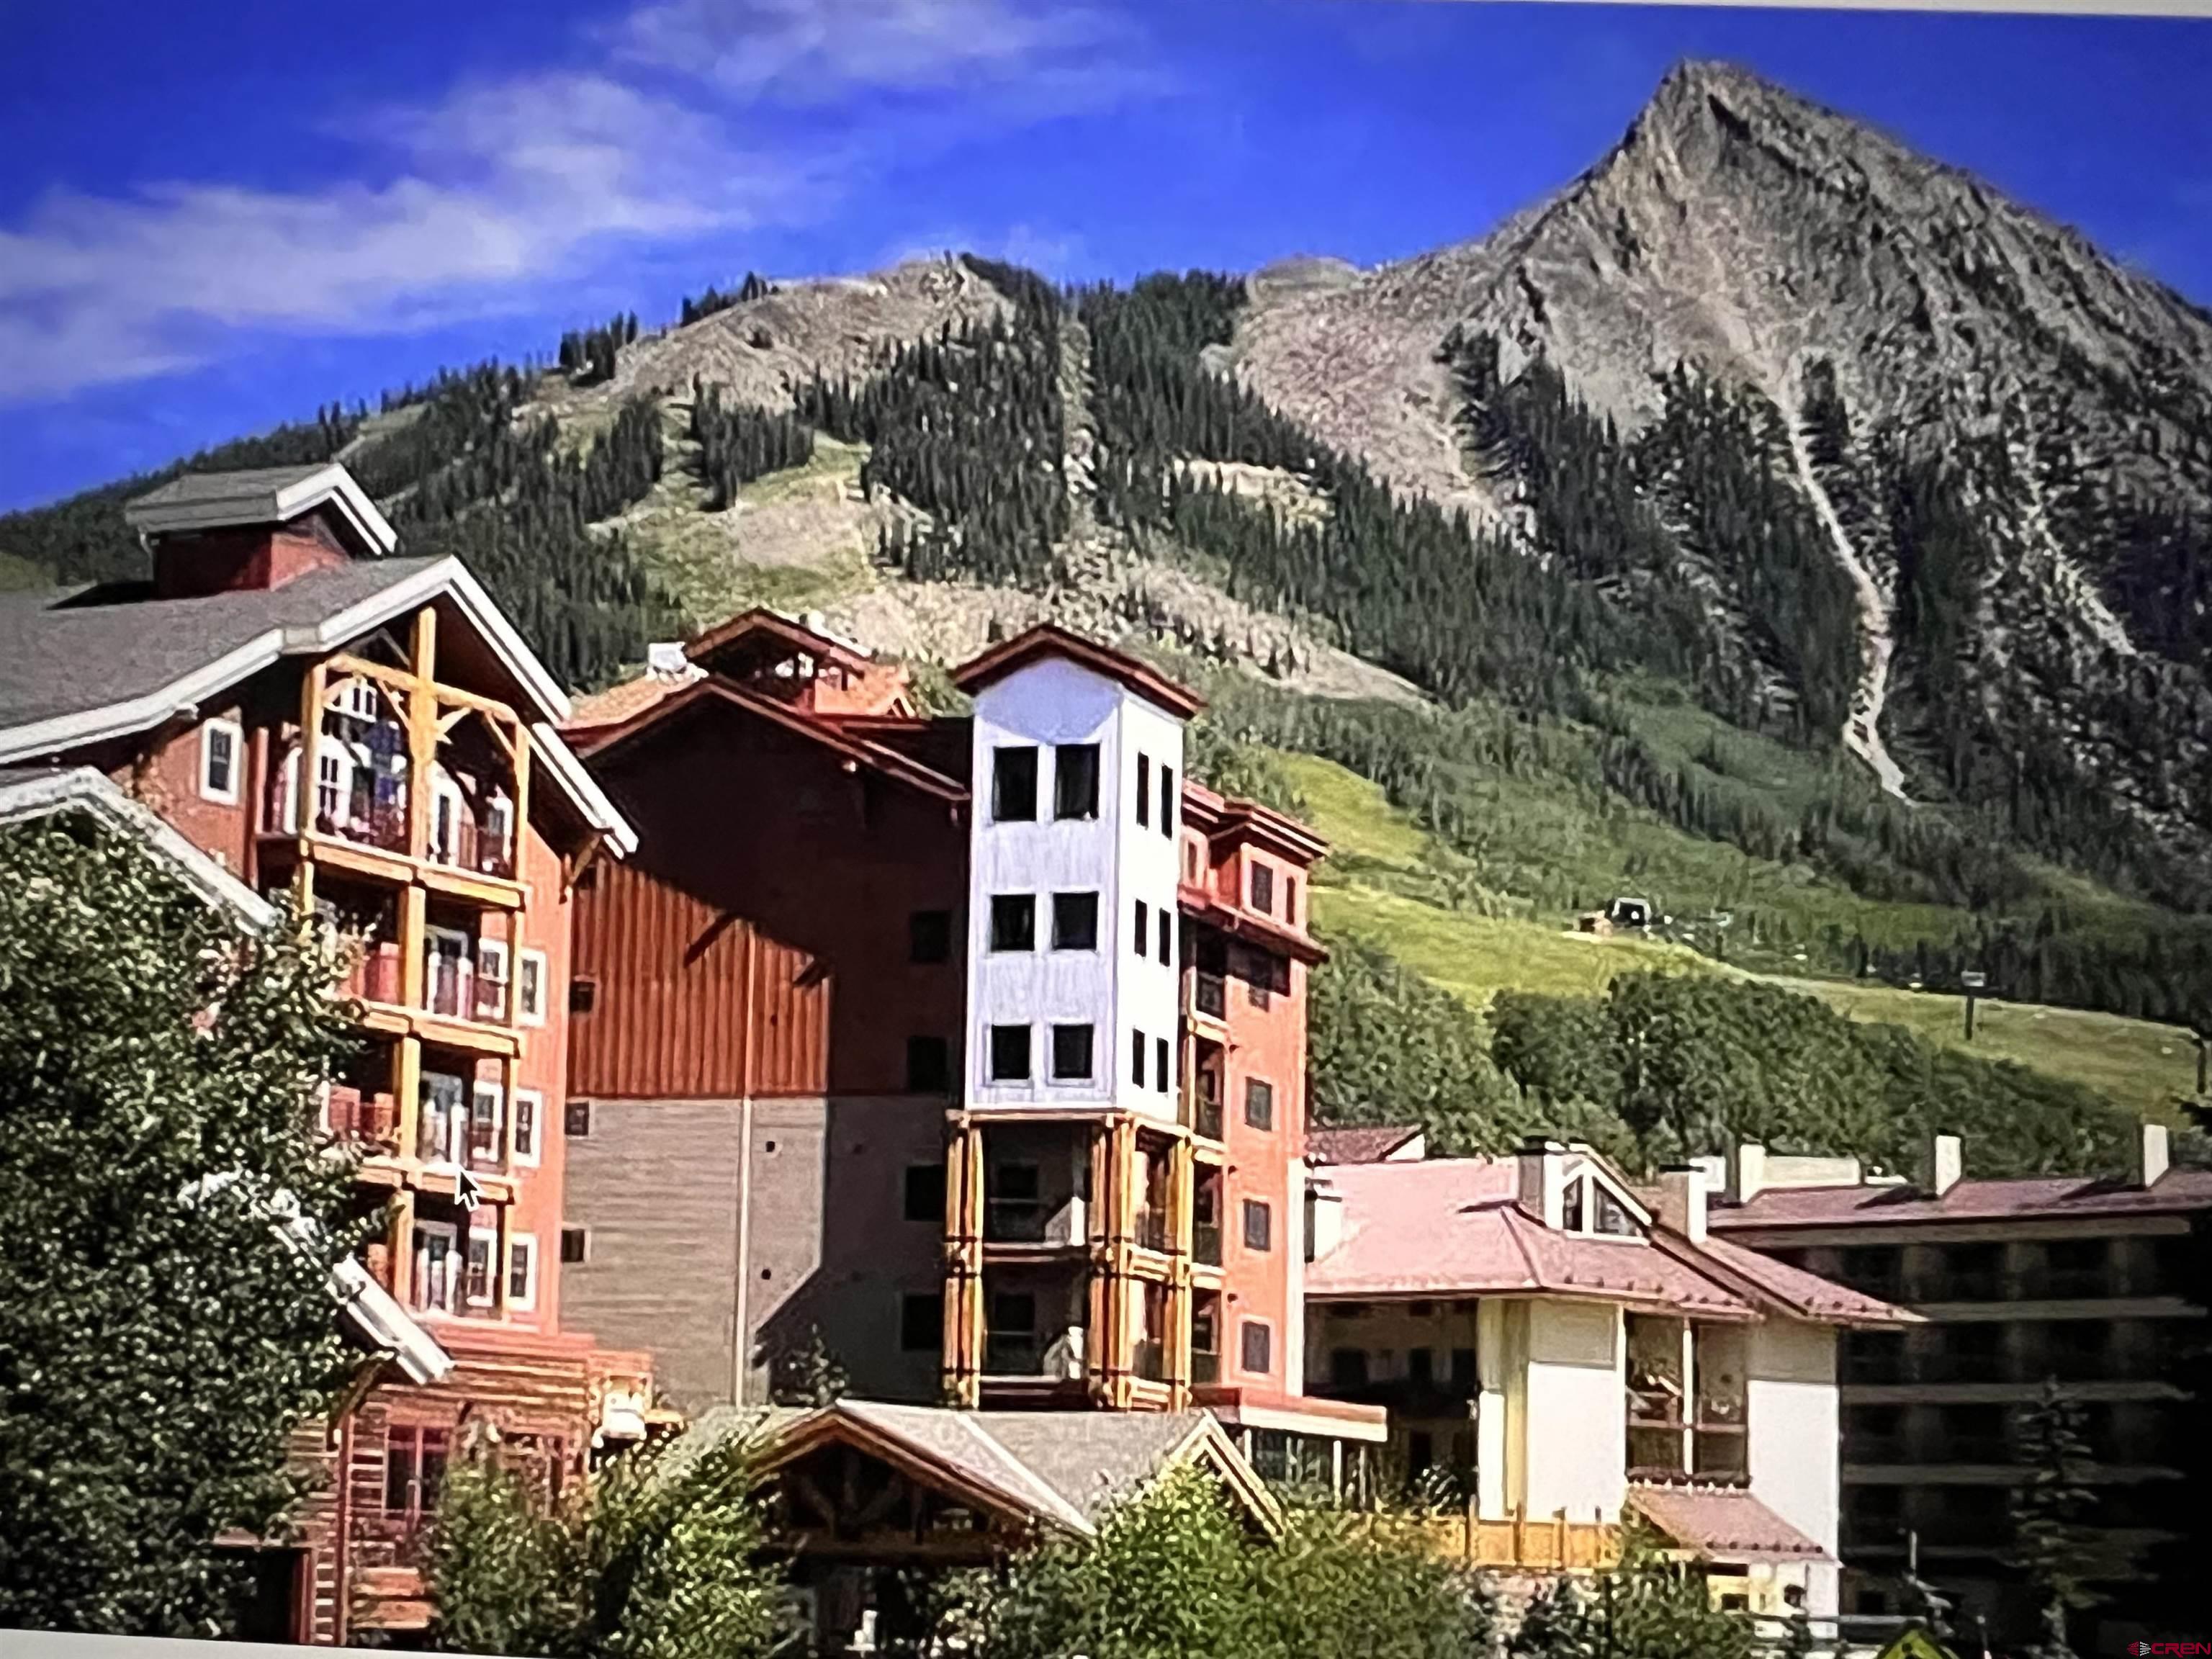 620 Gothic Road, #Unit 602 Mountaineer Square condo phase 1, Mt. Crested Butte, CO 81225 Listing Photo  1